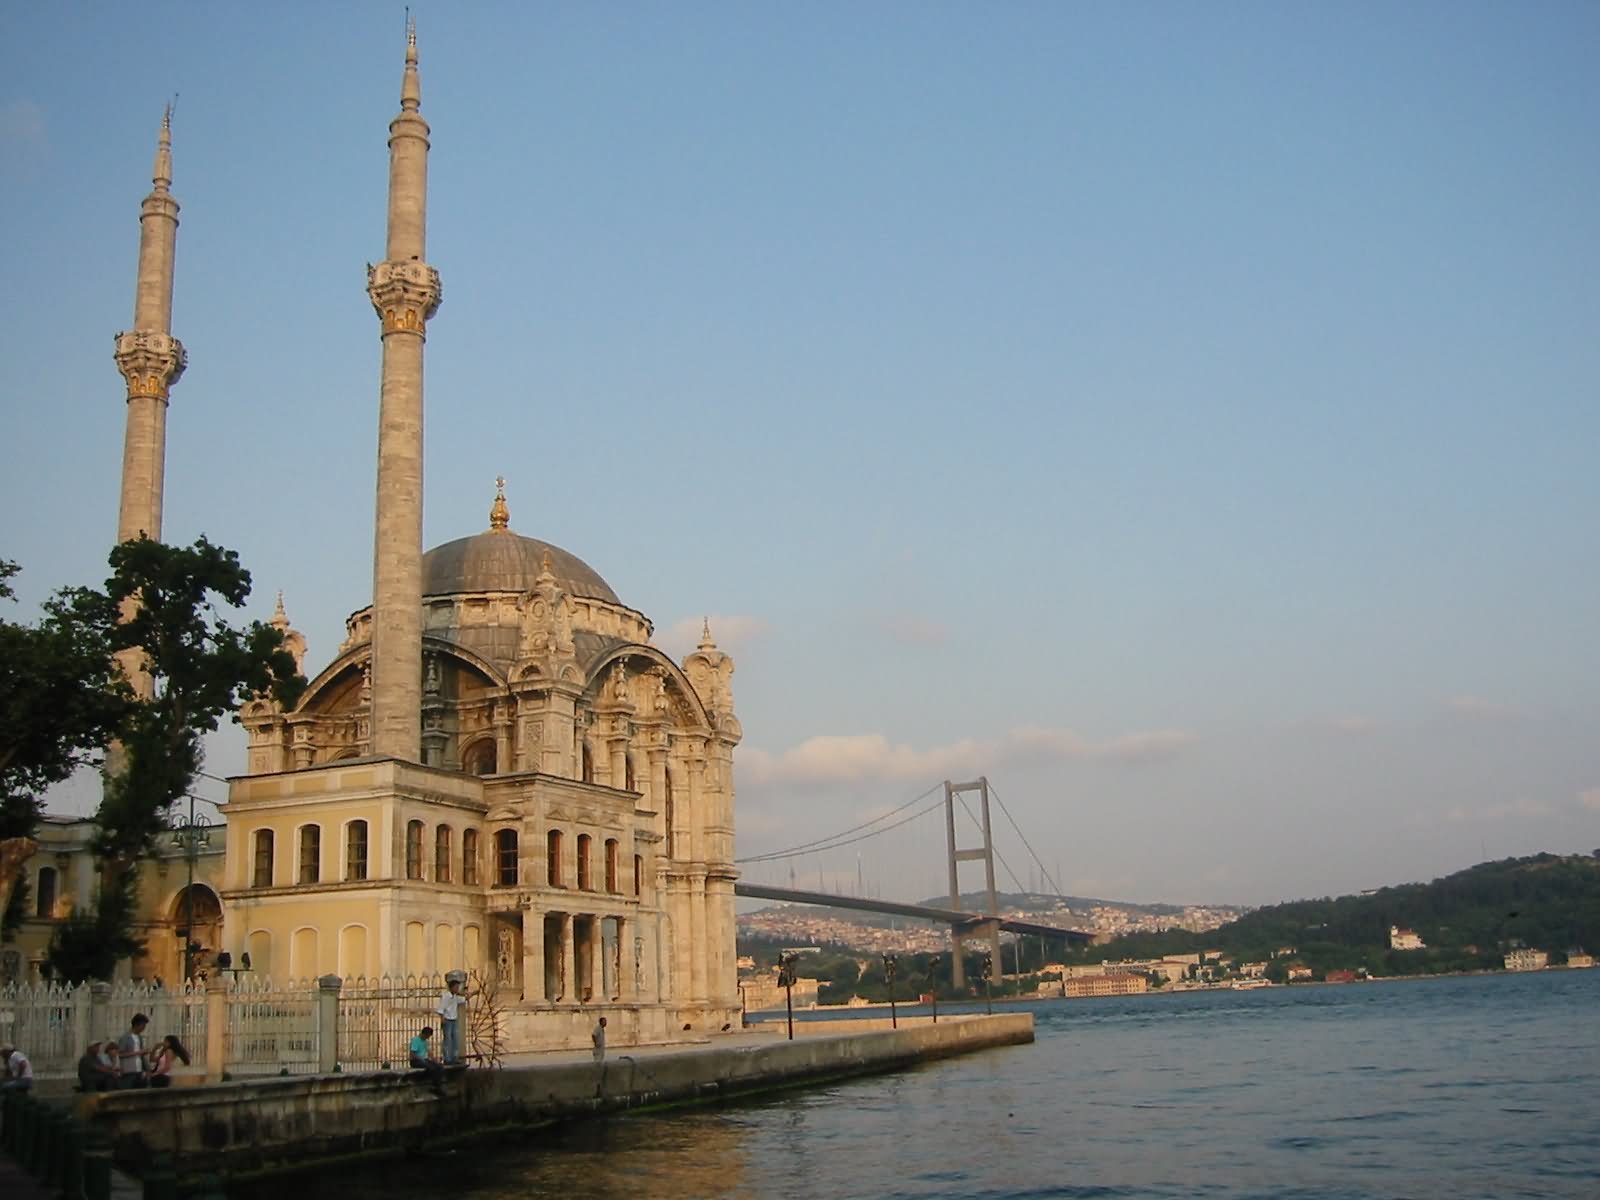 Two Minarets Of The Ortakoy Mosque In Istanbul